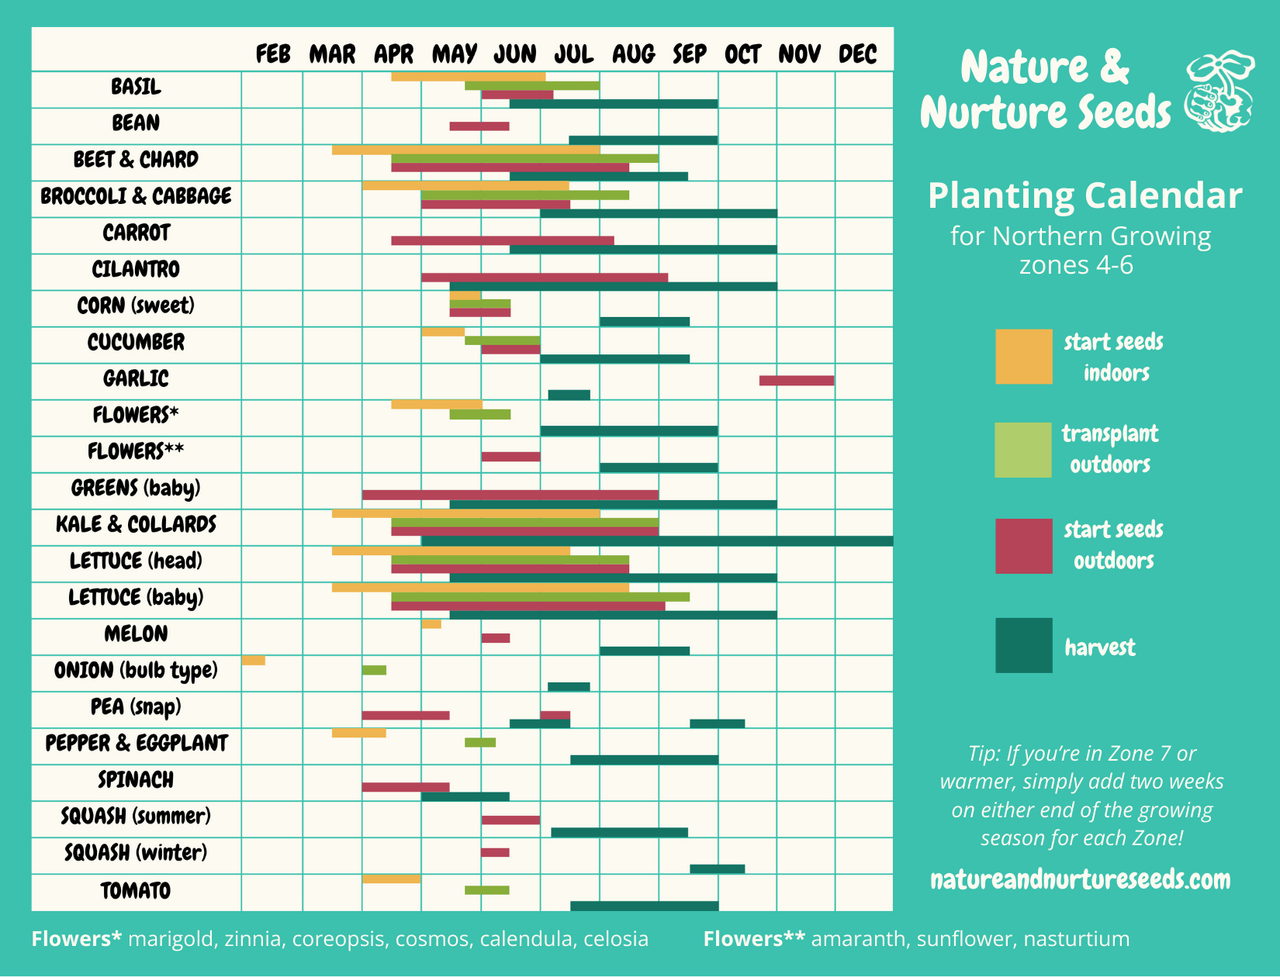 Free download of our seed planting calendar